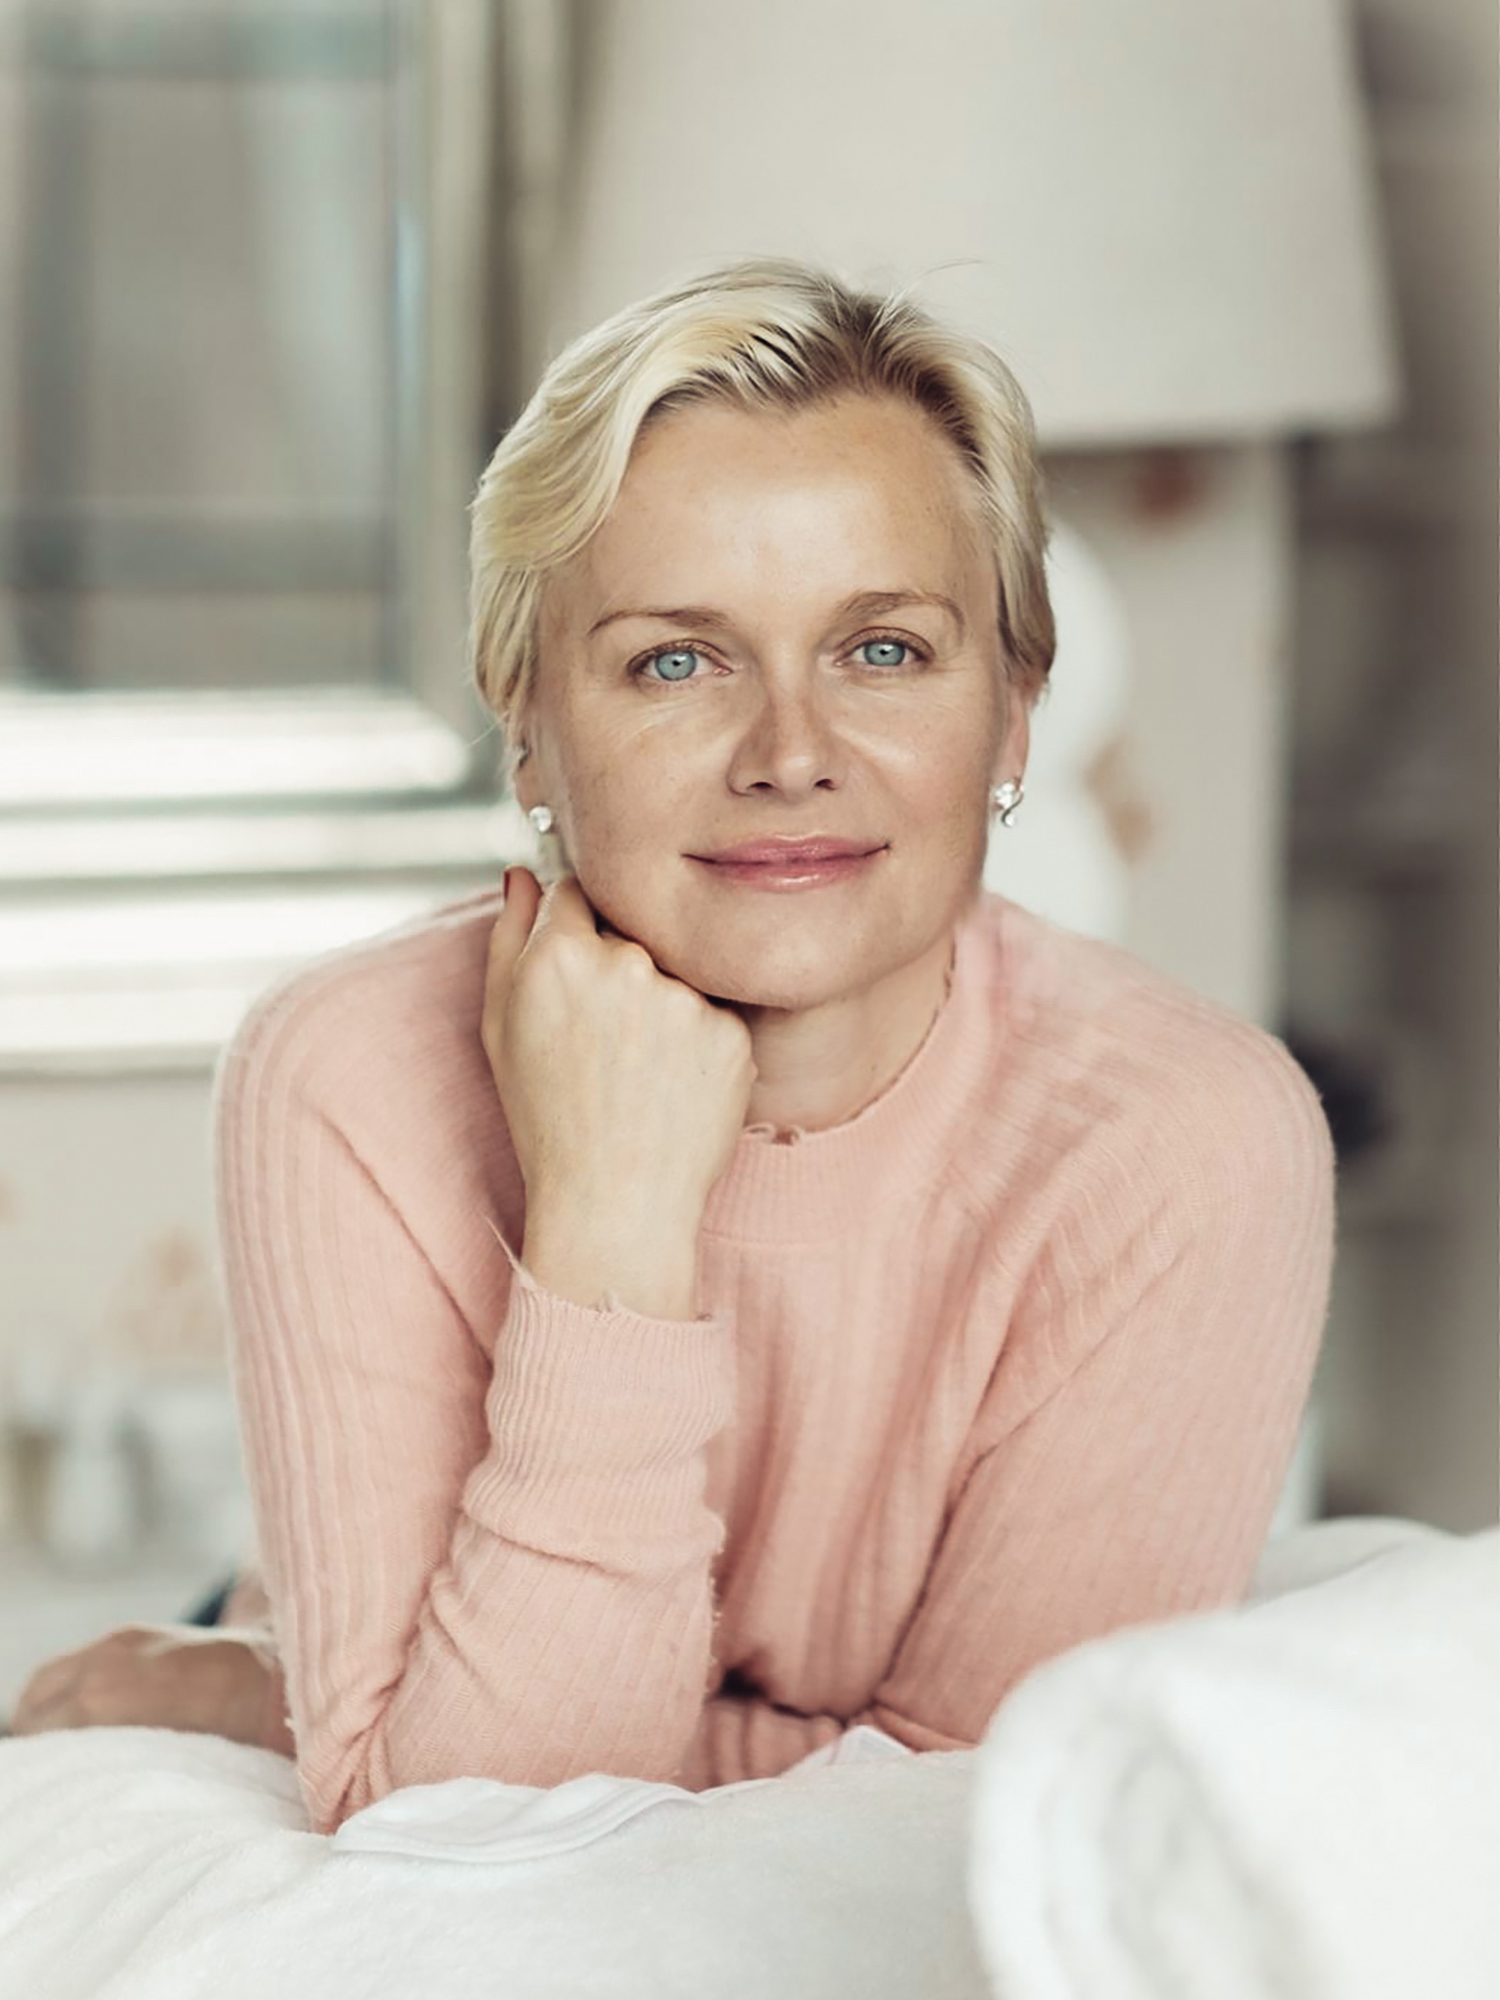 NET-A-PORTER'S 20 Incredible Women On What They Wish They'd Known